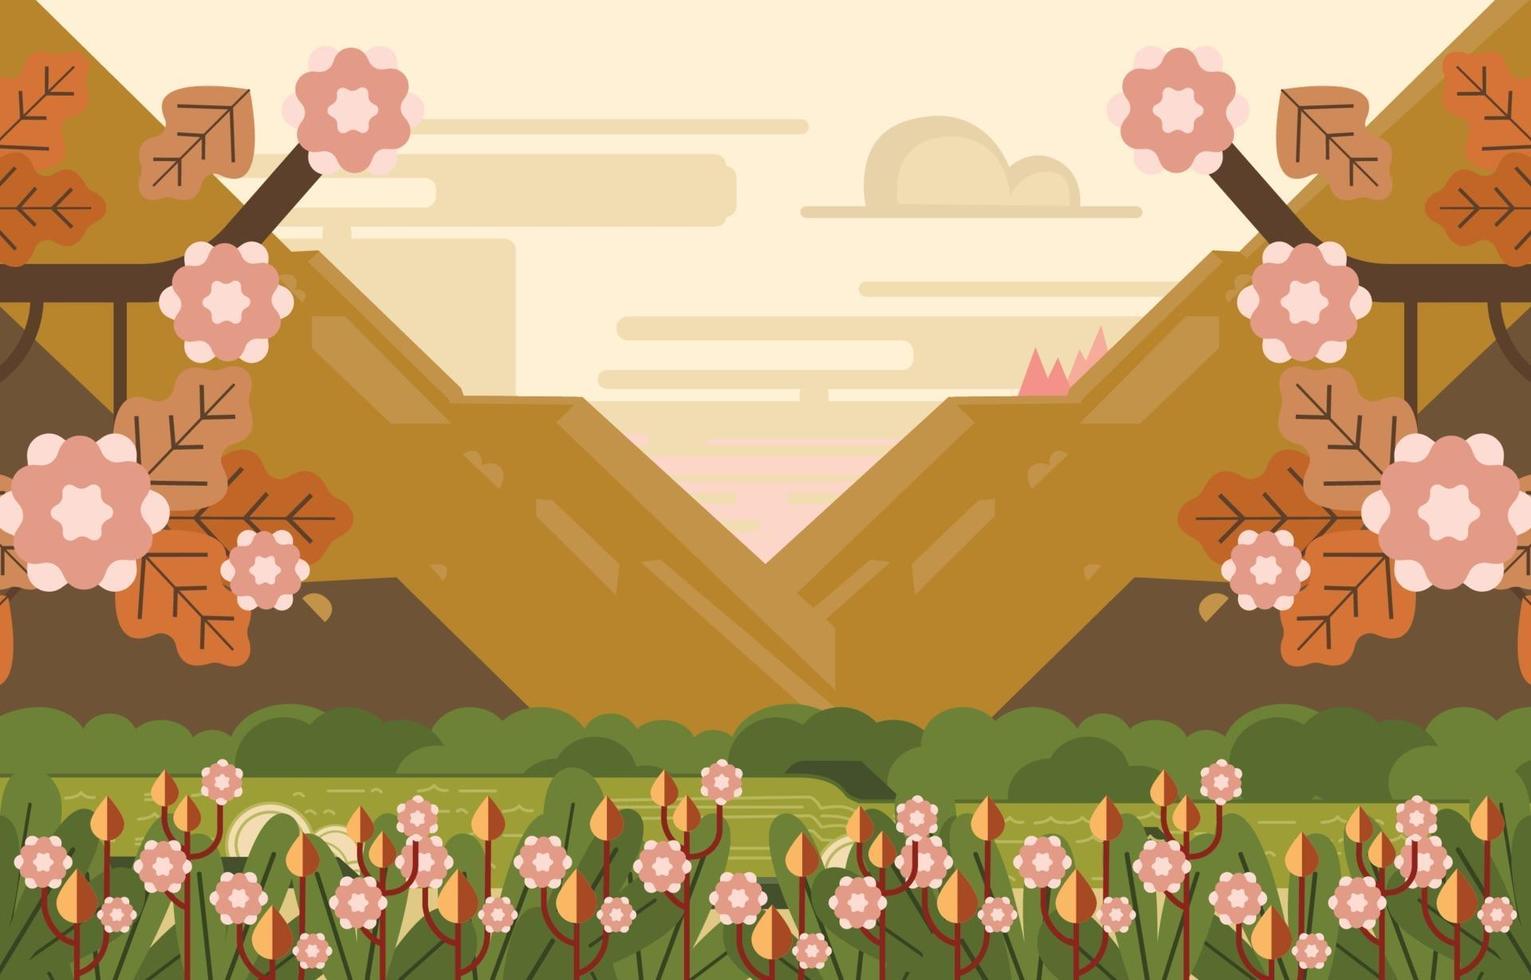 Autumn Flowers By The River With Mountain View Background vector